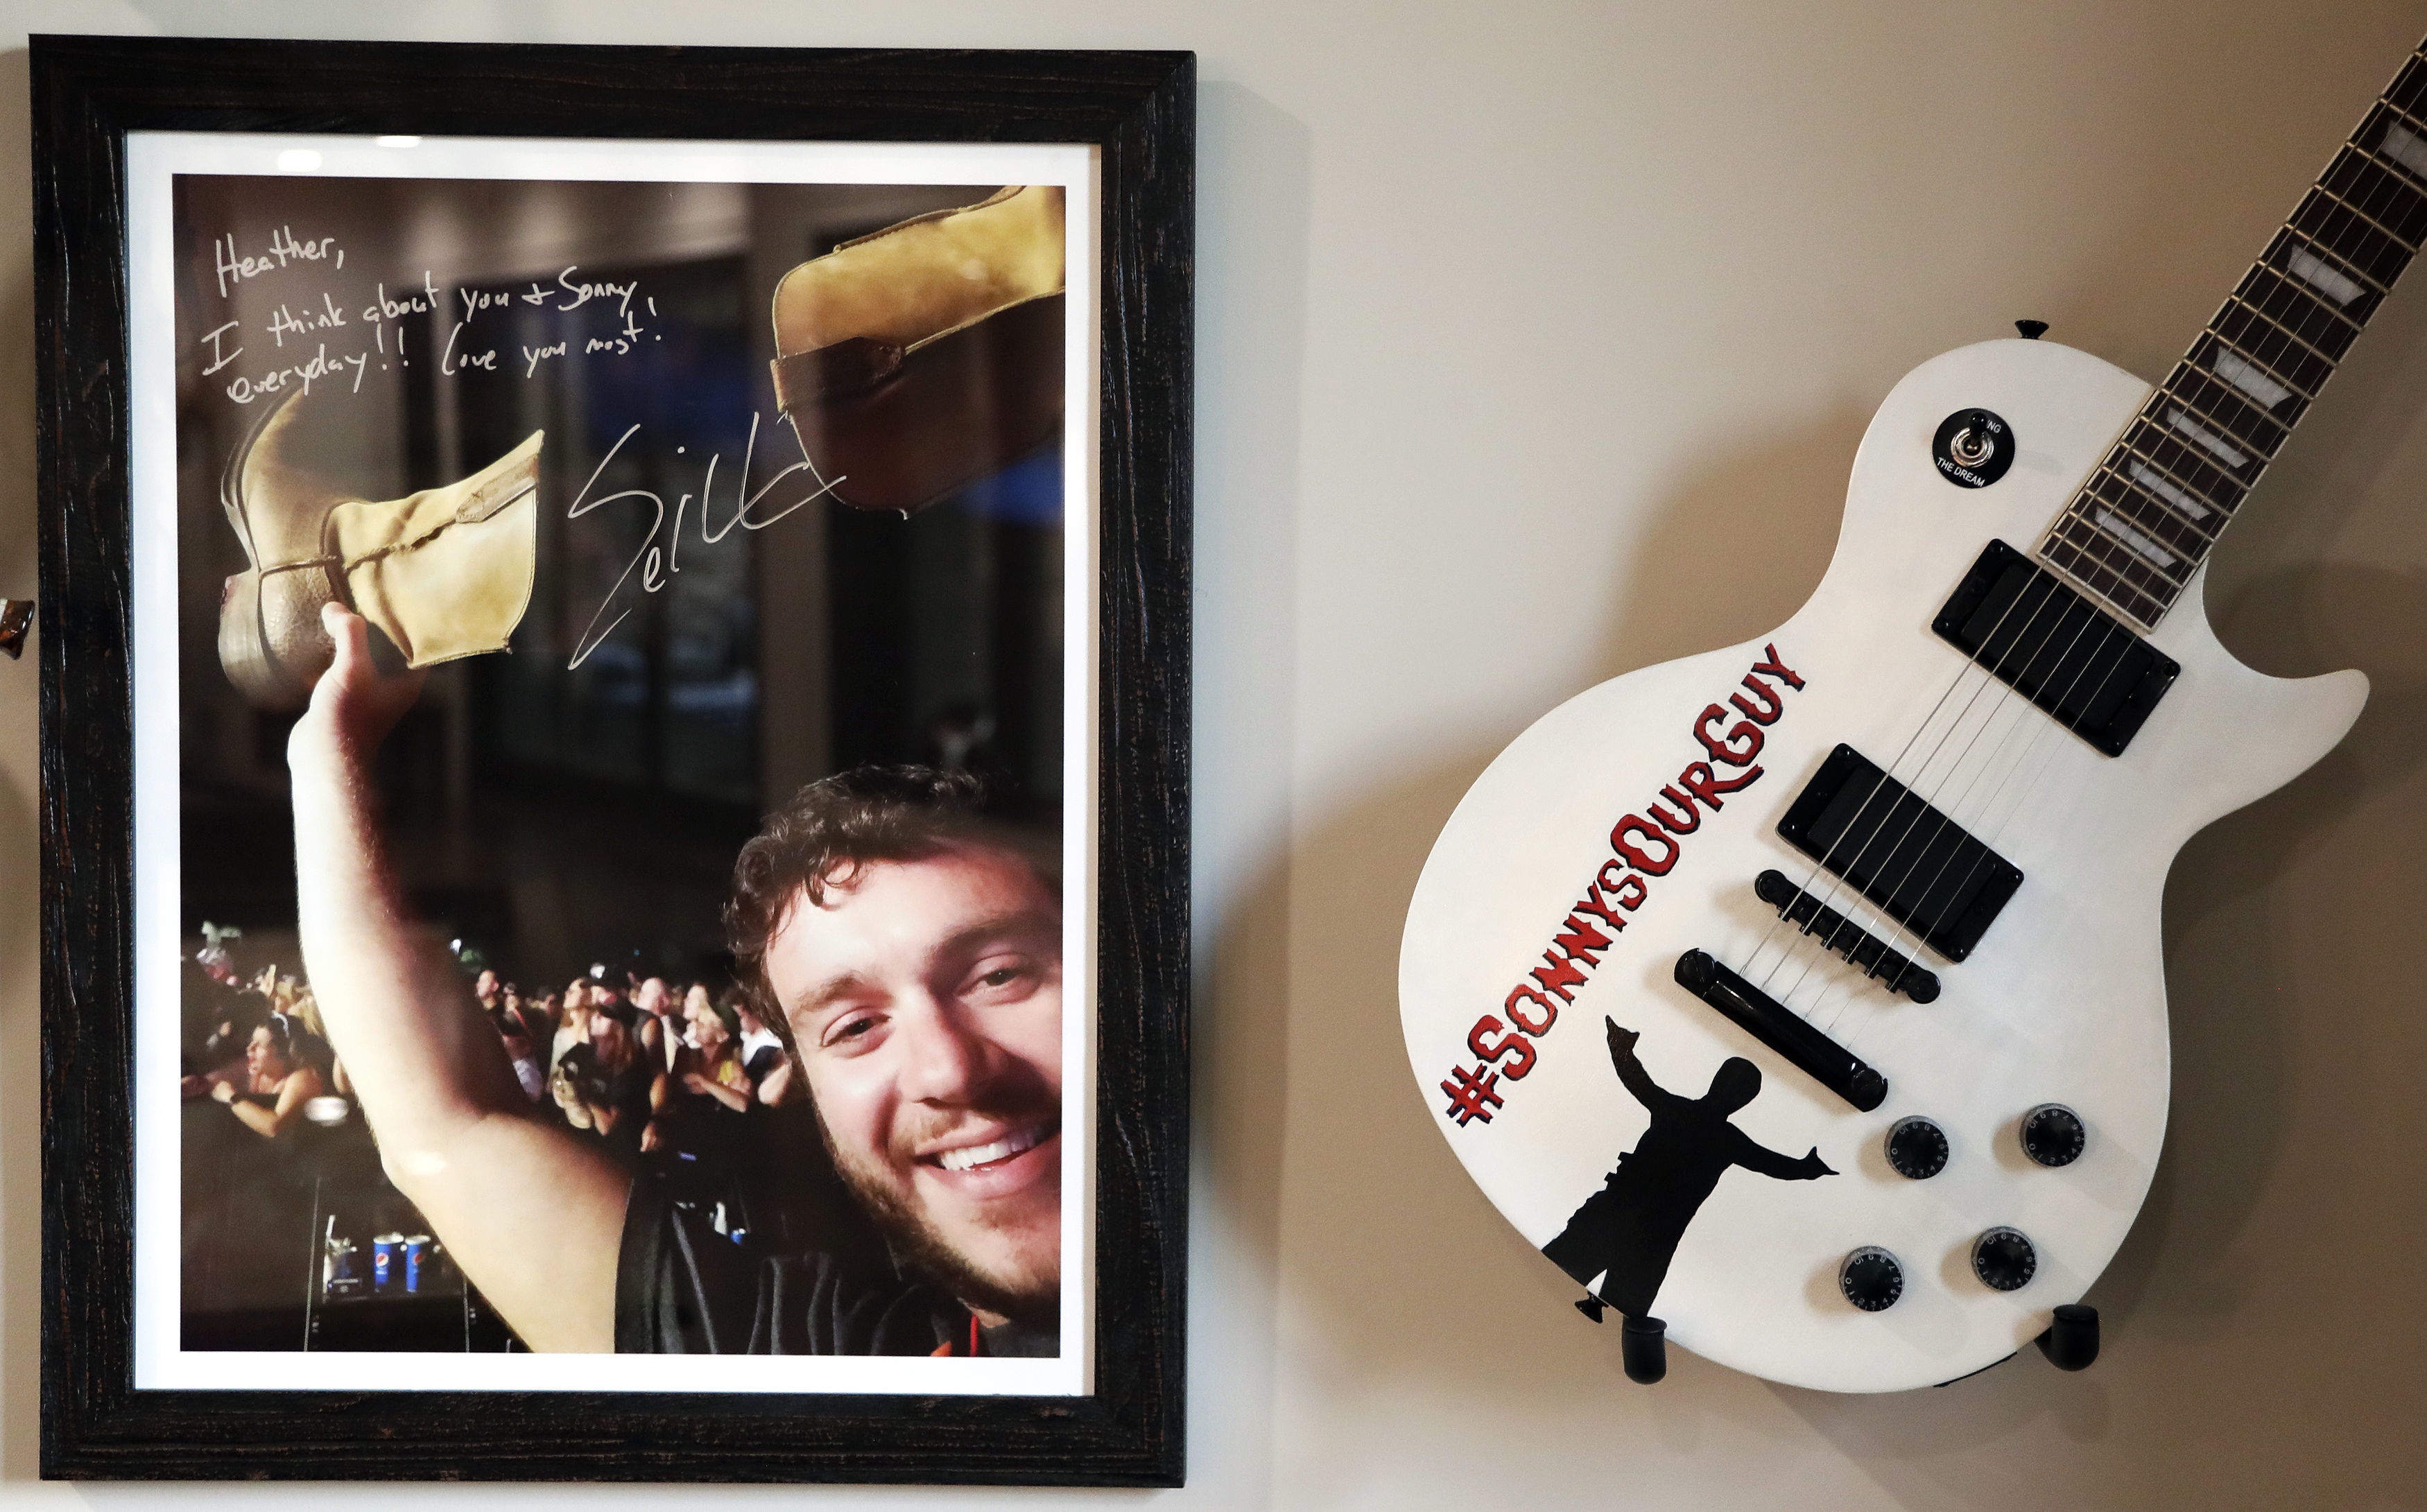 A picture of Sonny Melton, autographed by Eric Church, and a guitar from the Eric Church fan club